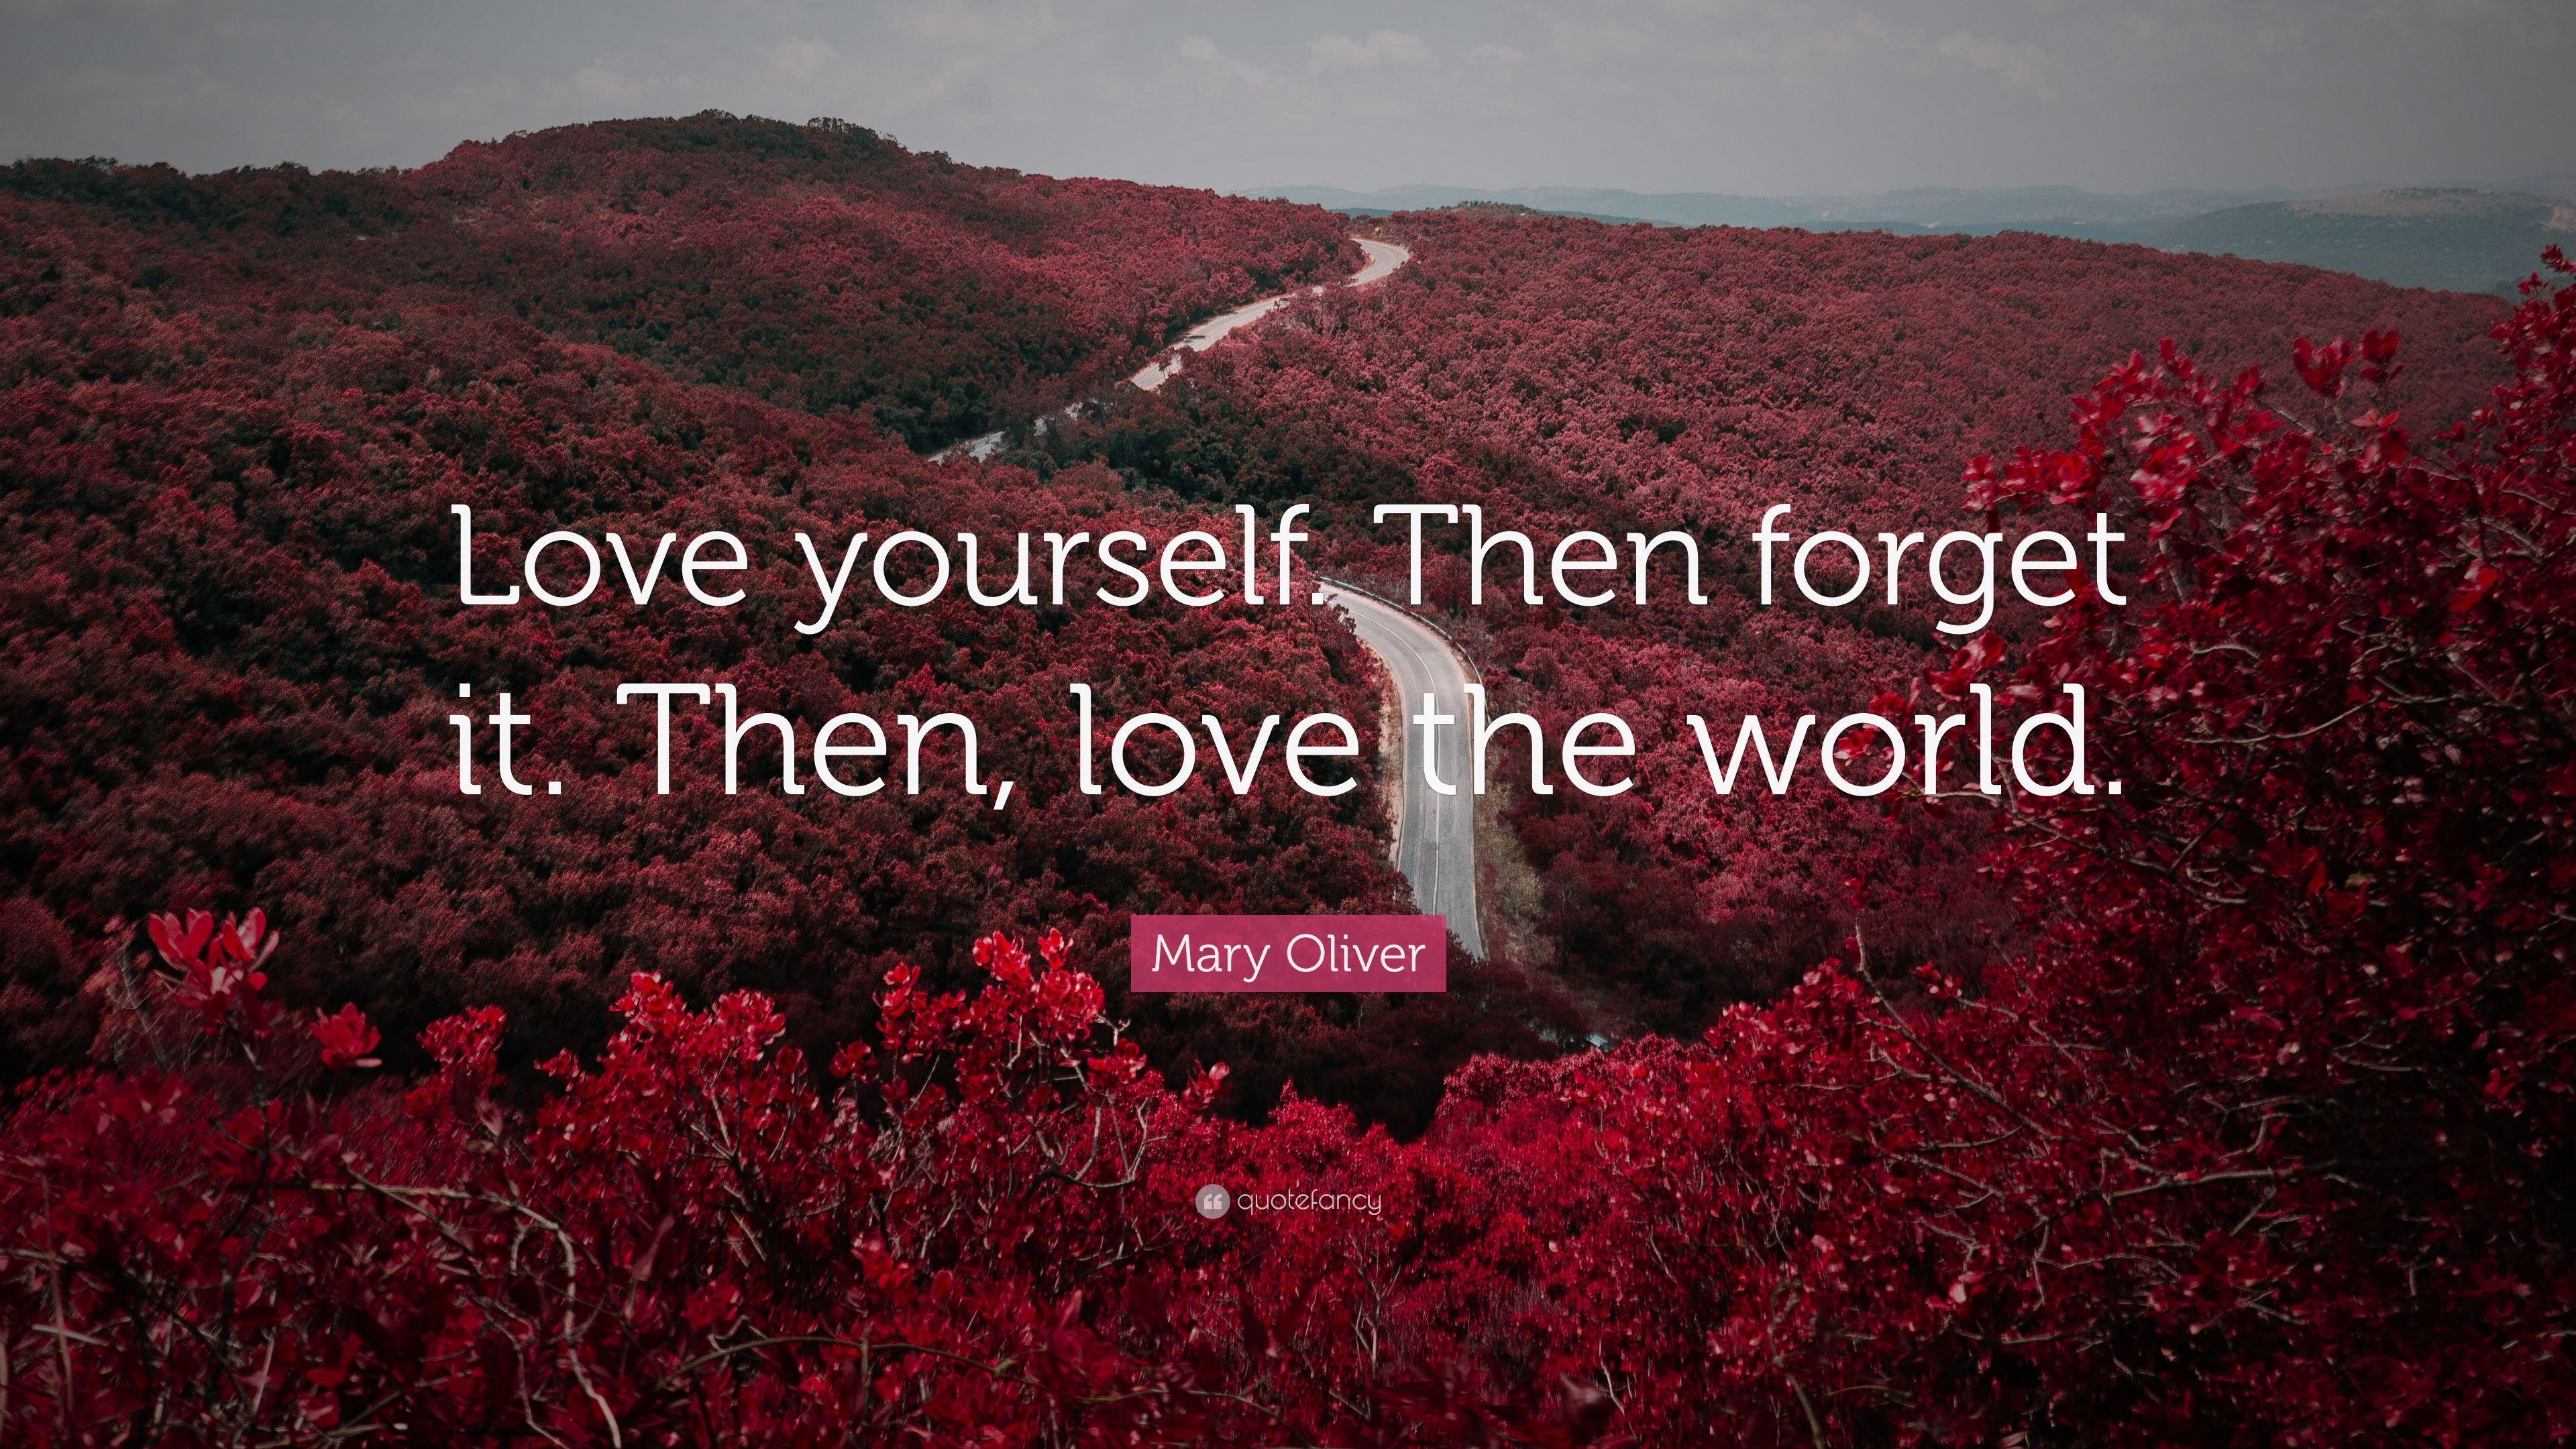 Mary Oliver Quote: “Love yourself. Then forget it. Then, love